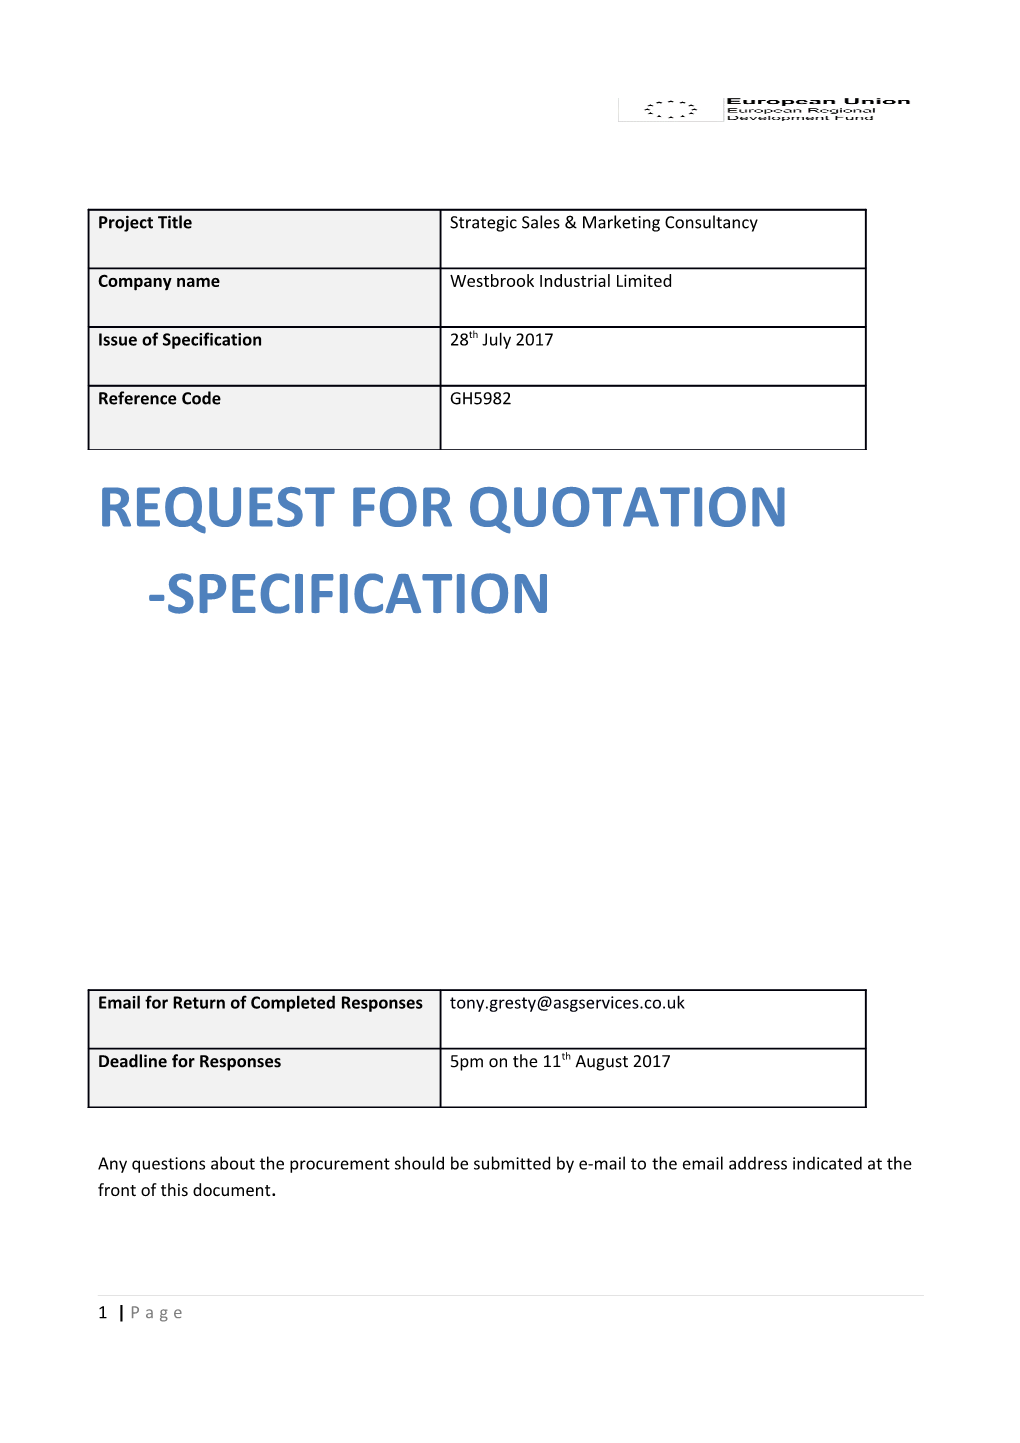 Request for Quotation -Specification